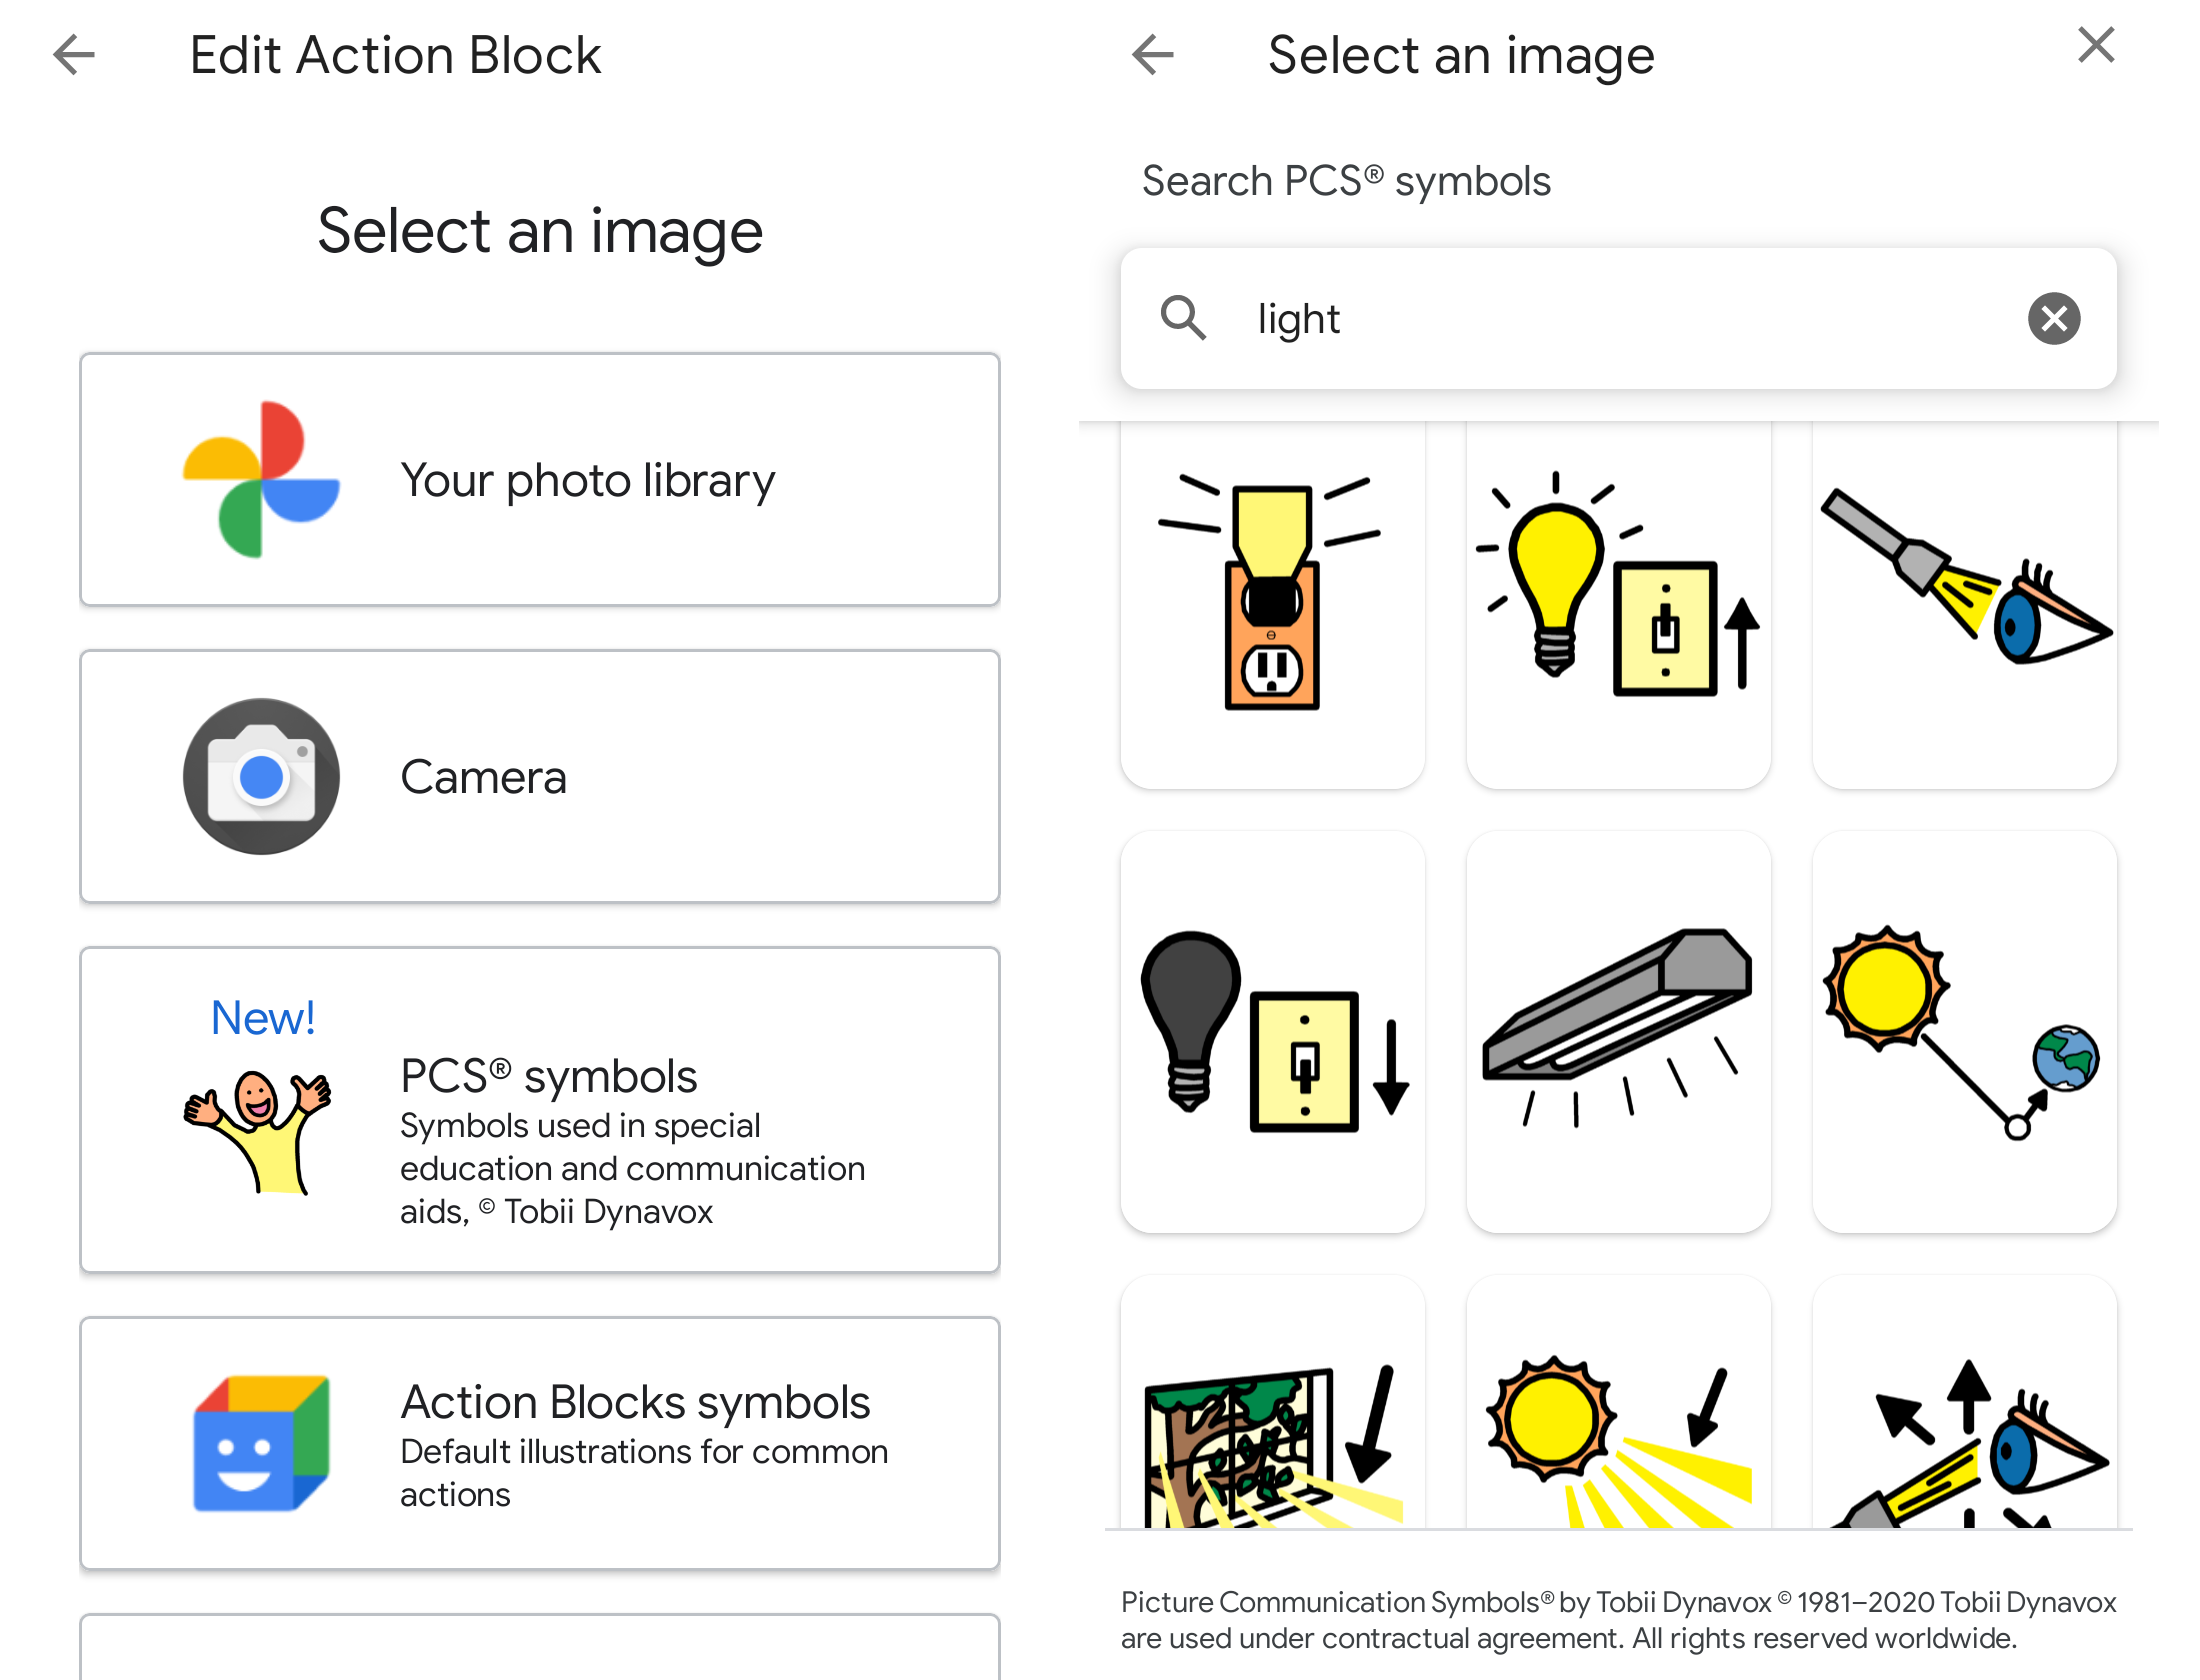 Tobii and Google interface for adding actions using pictorial icons.